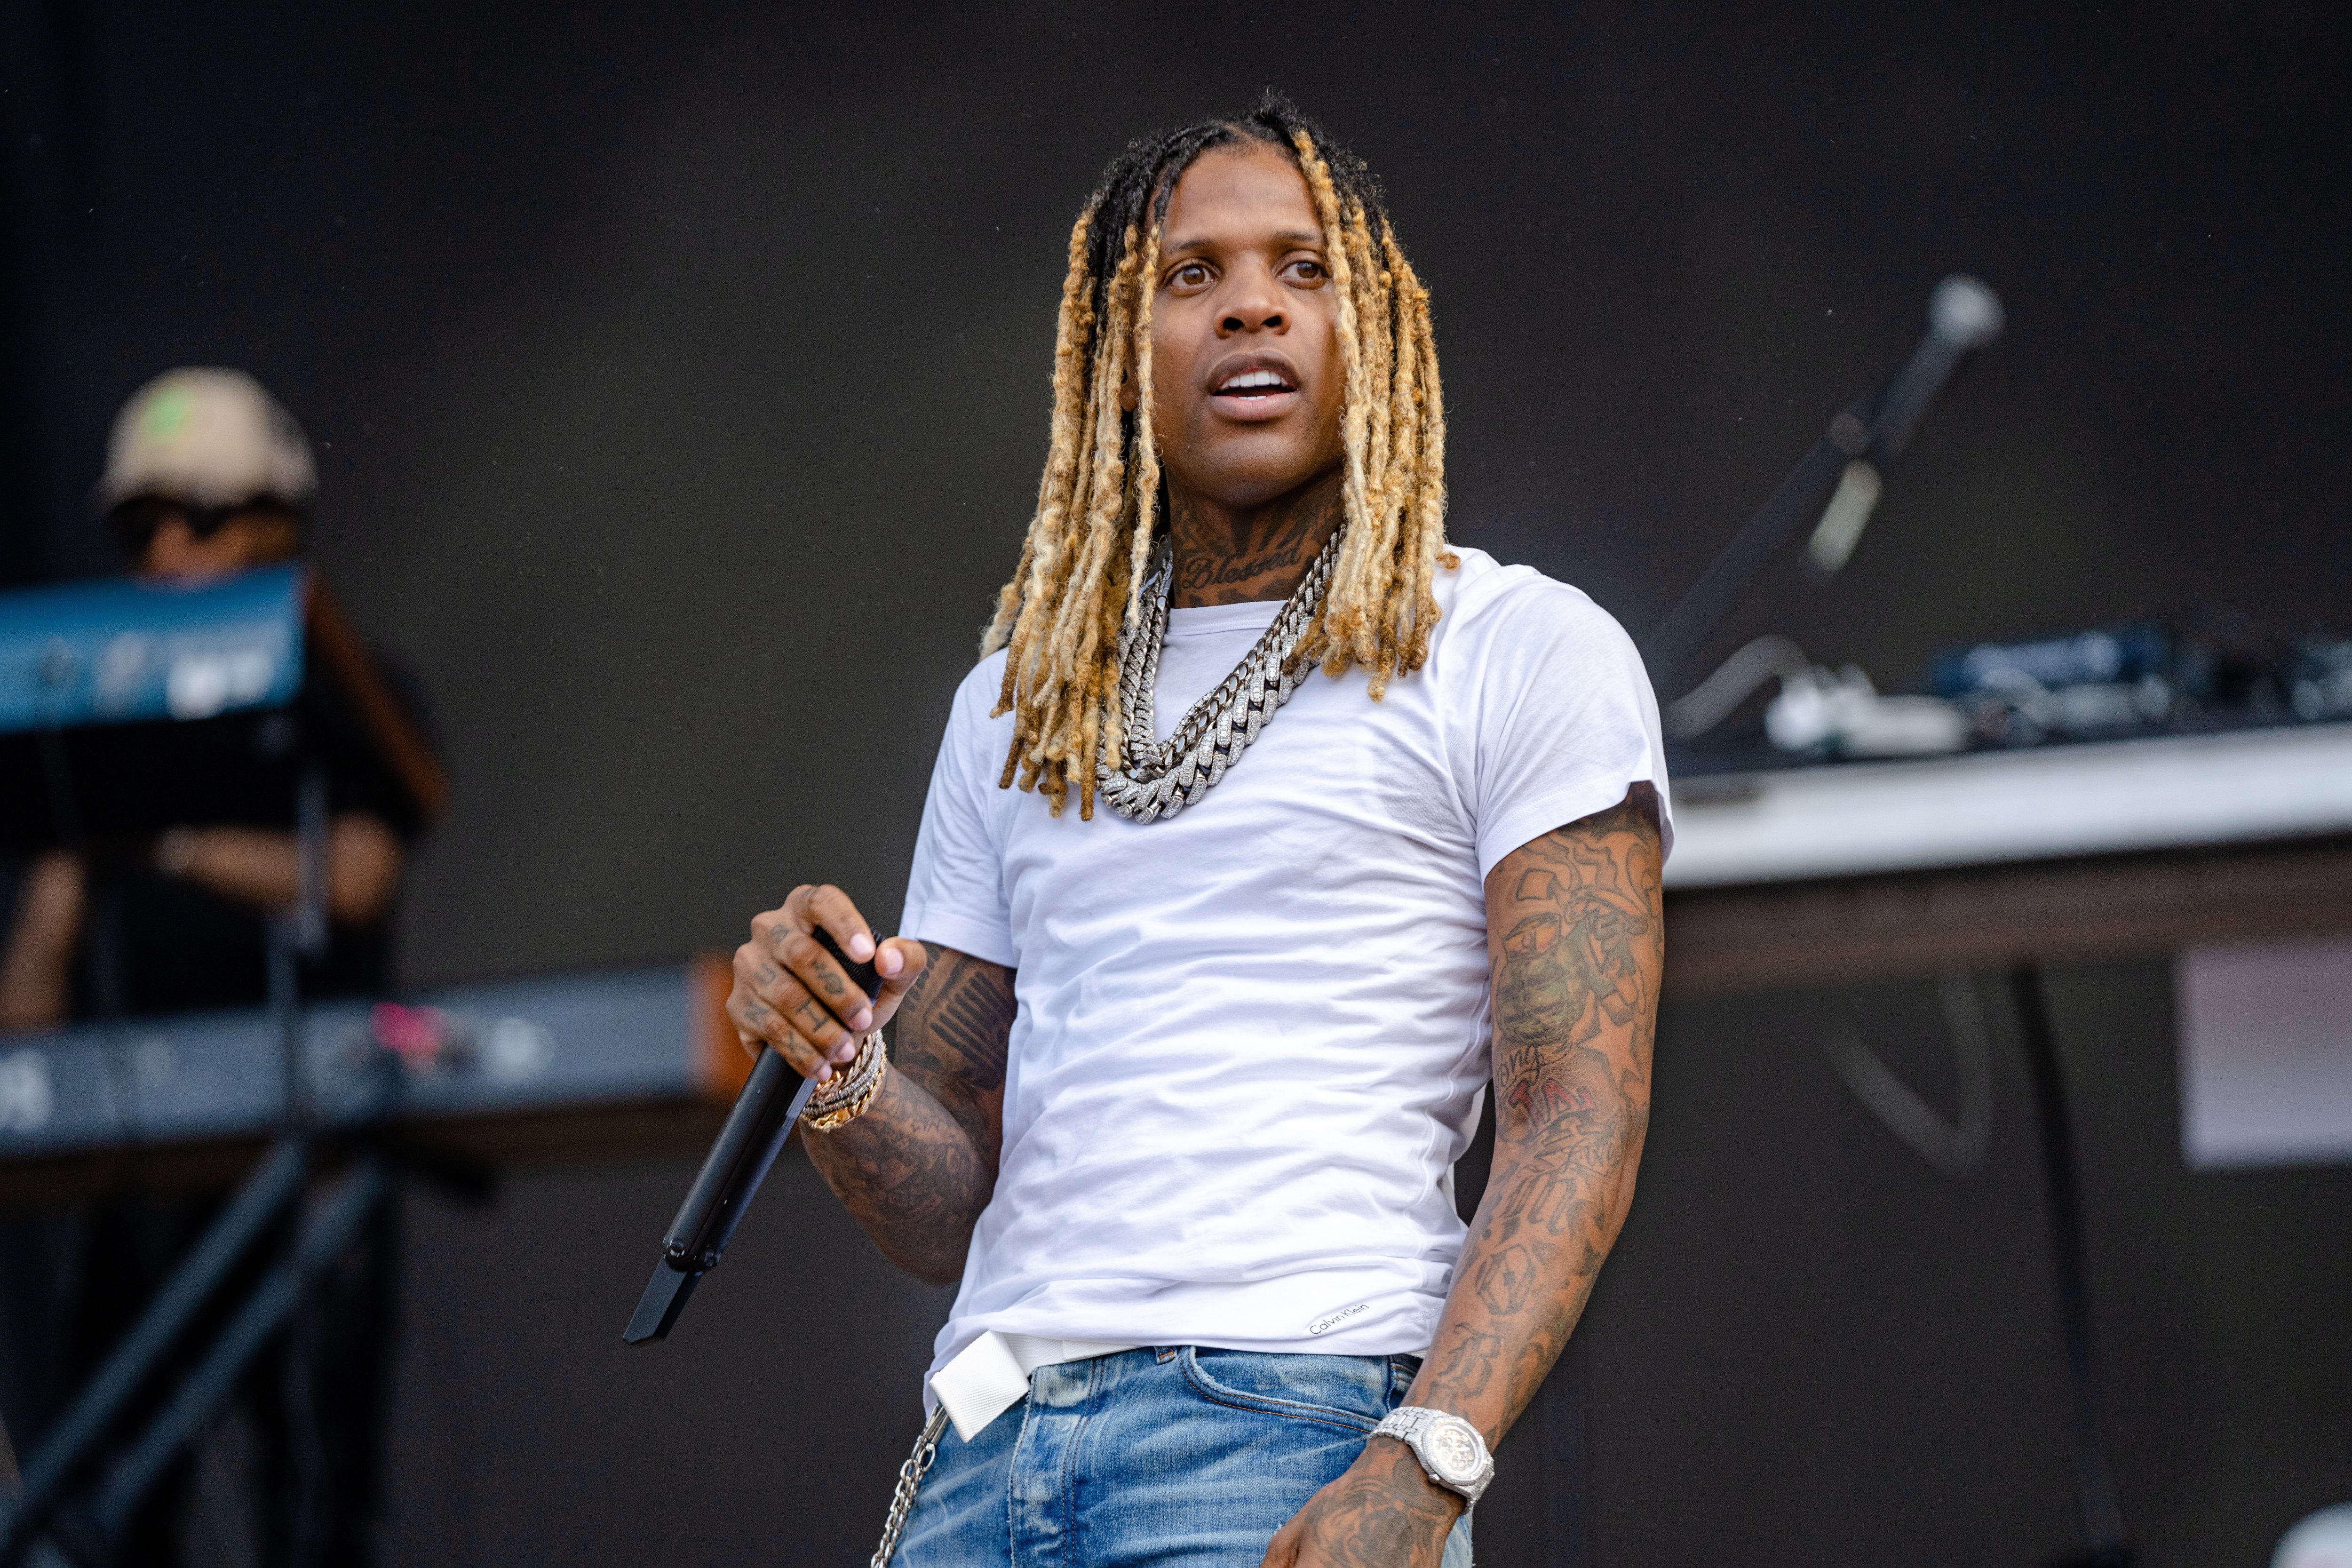 Lil Durk performing at the Lollapalooza on July 30, 2022 | Source: Getty Images